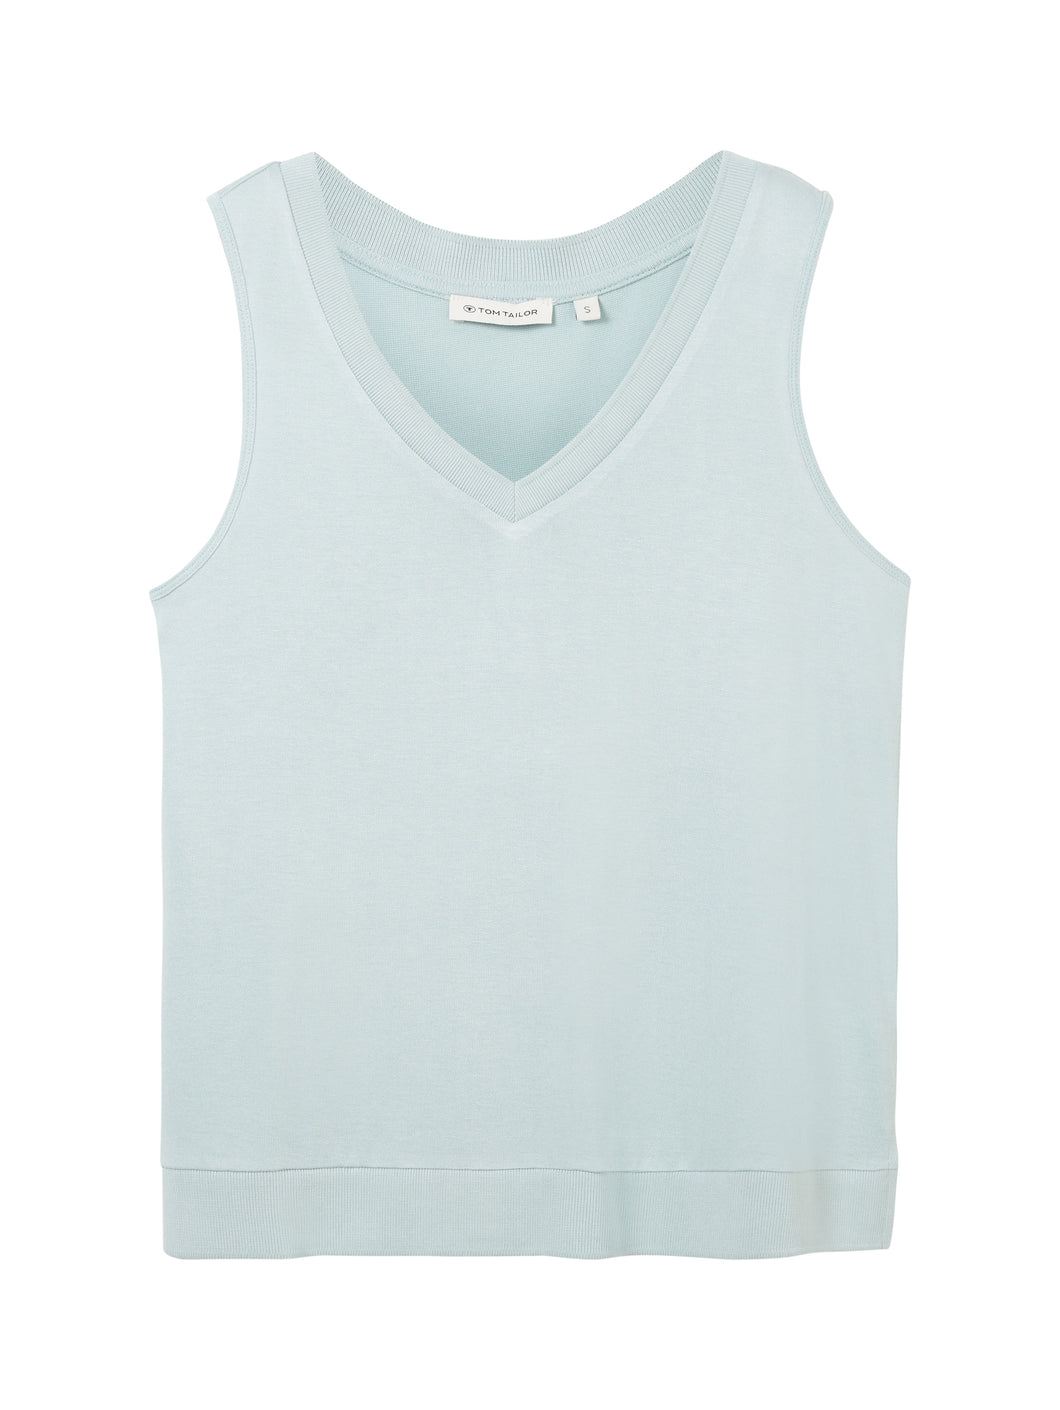 TOM TAILOR T-SHIRT TOP WITH RIB DETAILS dusty mint blue